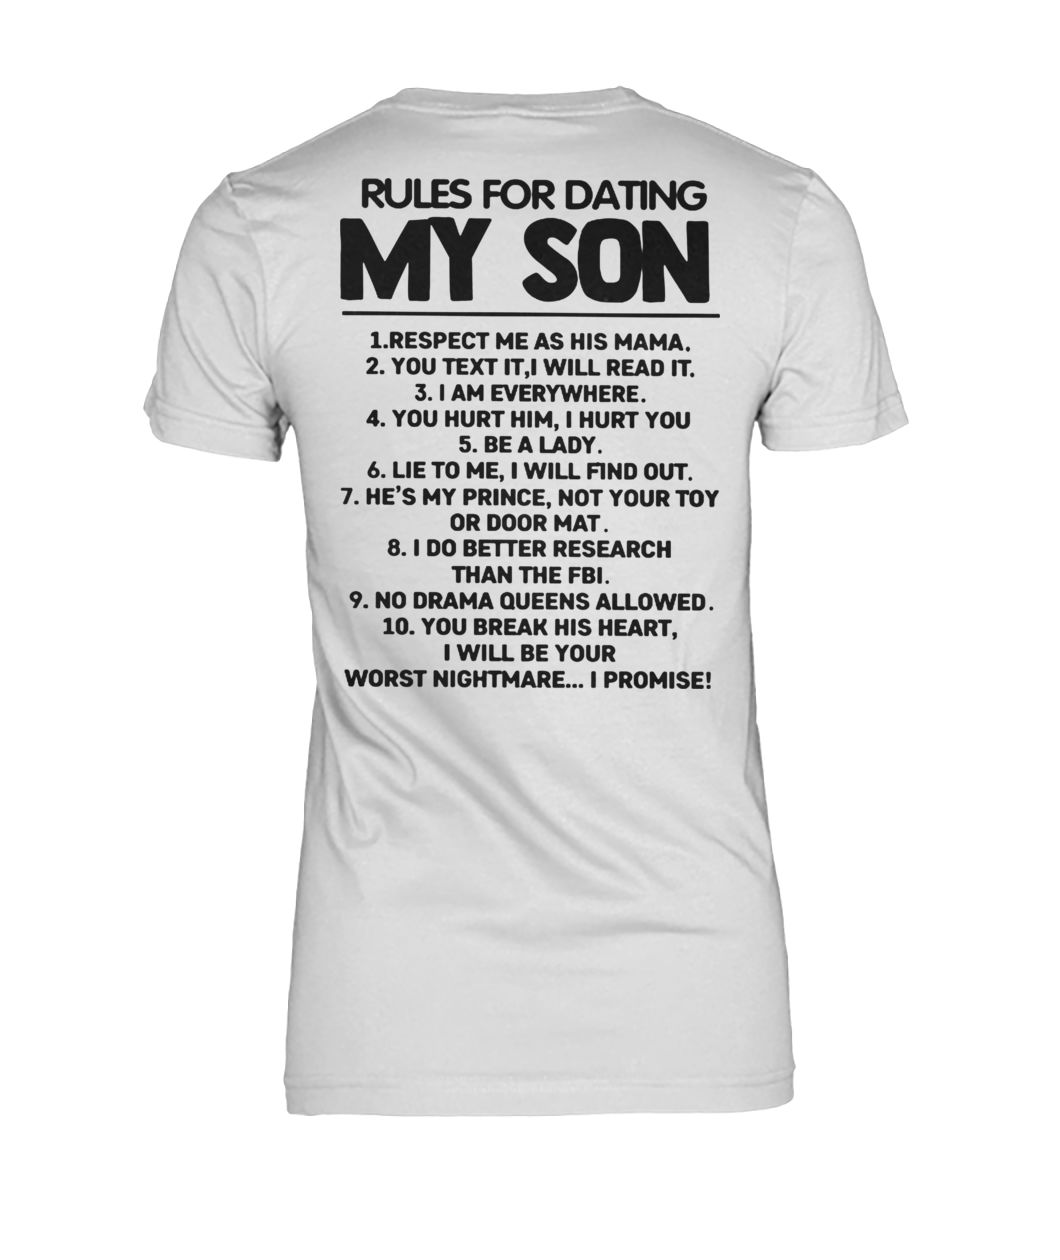 Rules for dating my son 1 respect me as his mama women's crew tee